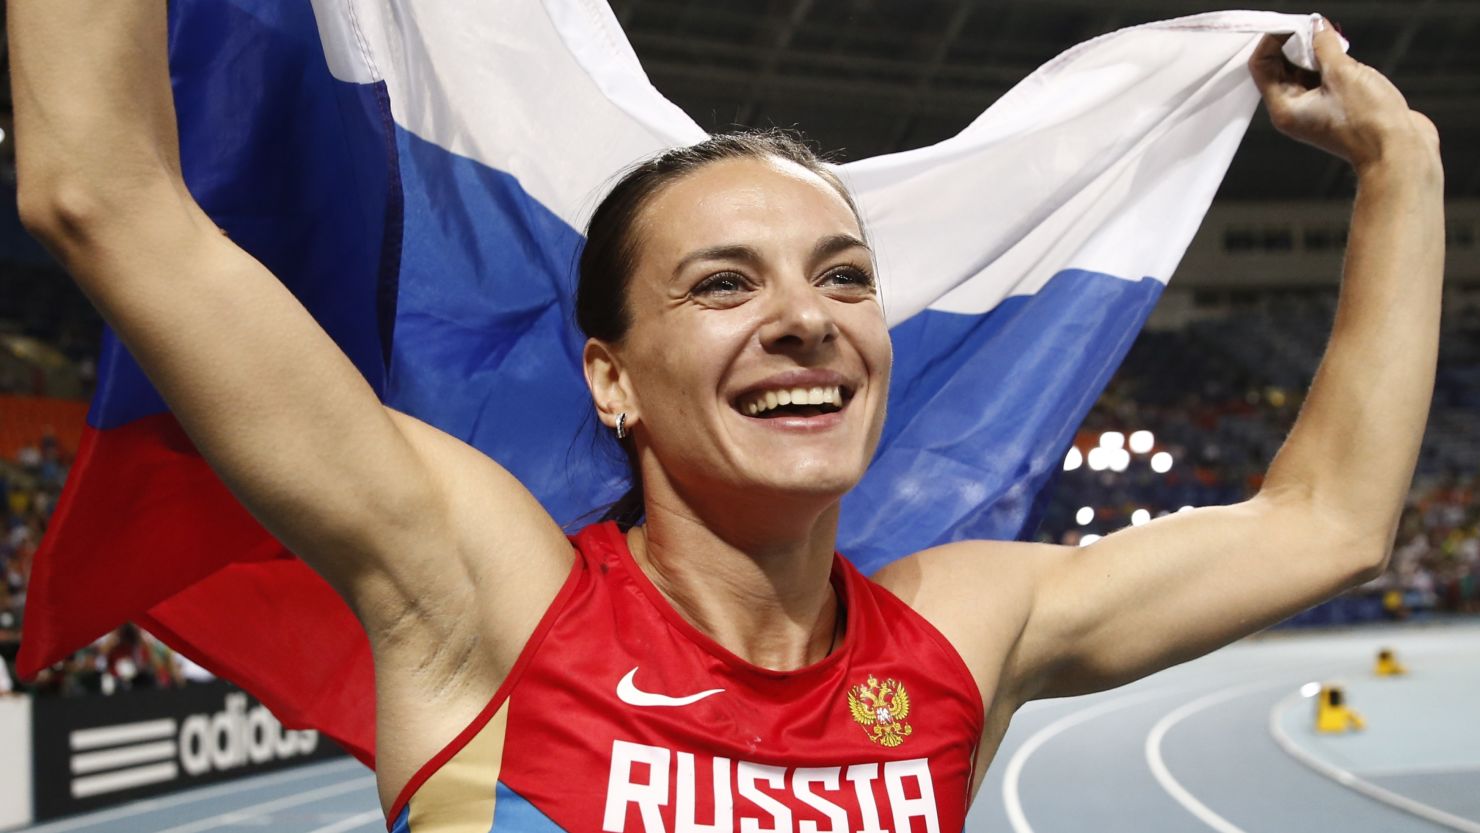 Golden girl: Yelena Isinbayeva celebrates her victory in the World Championship pole vault in Moscow.